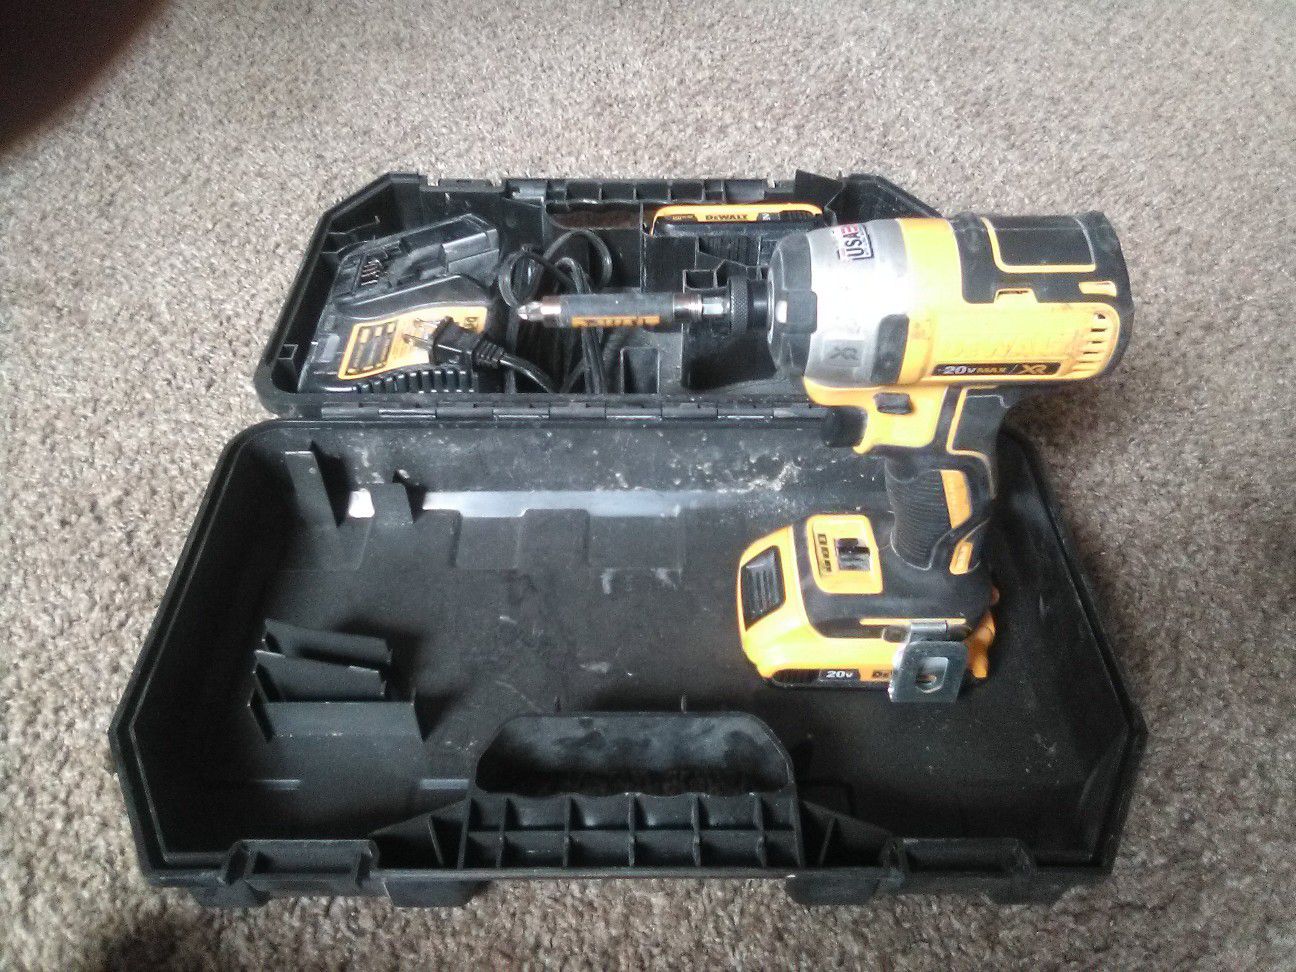 Dewalt 20v 3 speed Impact drill. 3 months old. Charger and 2 batteries.